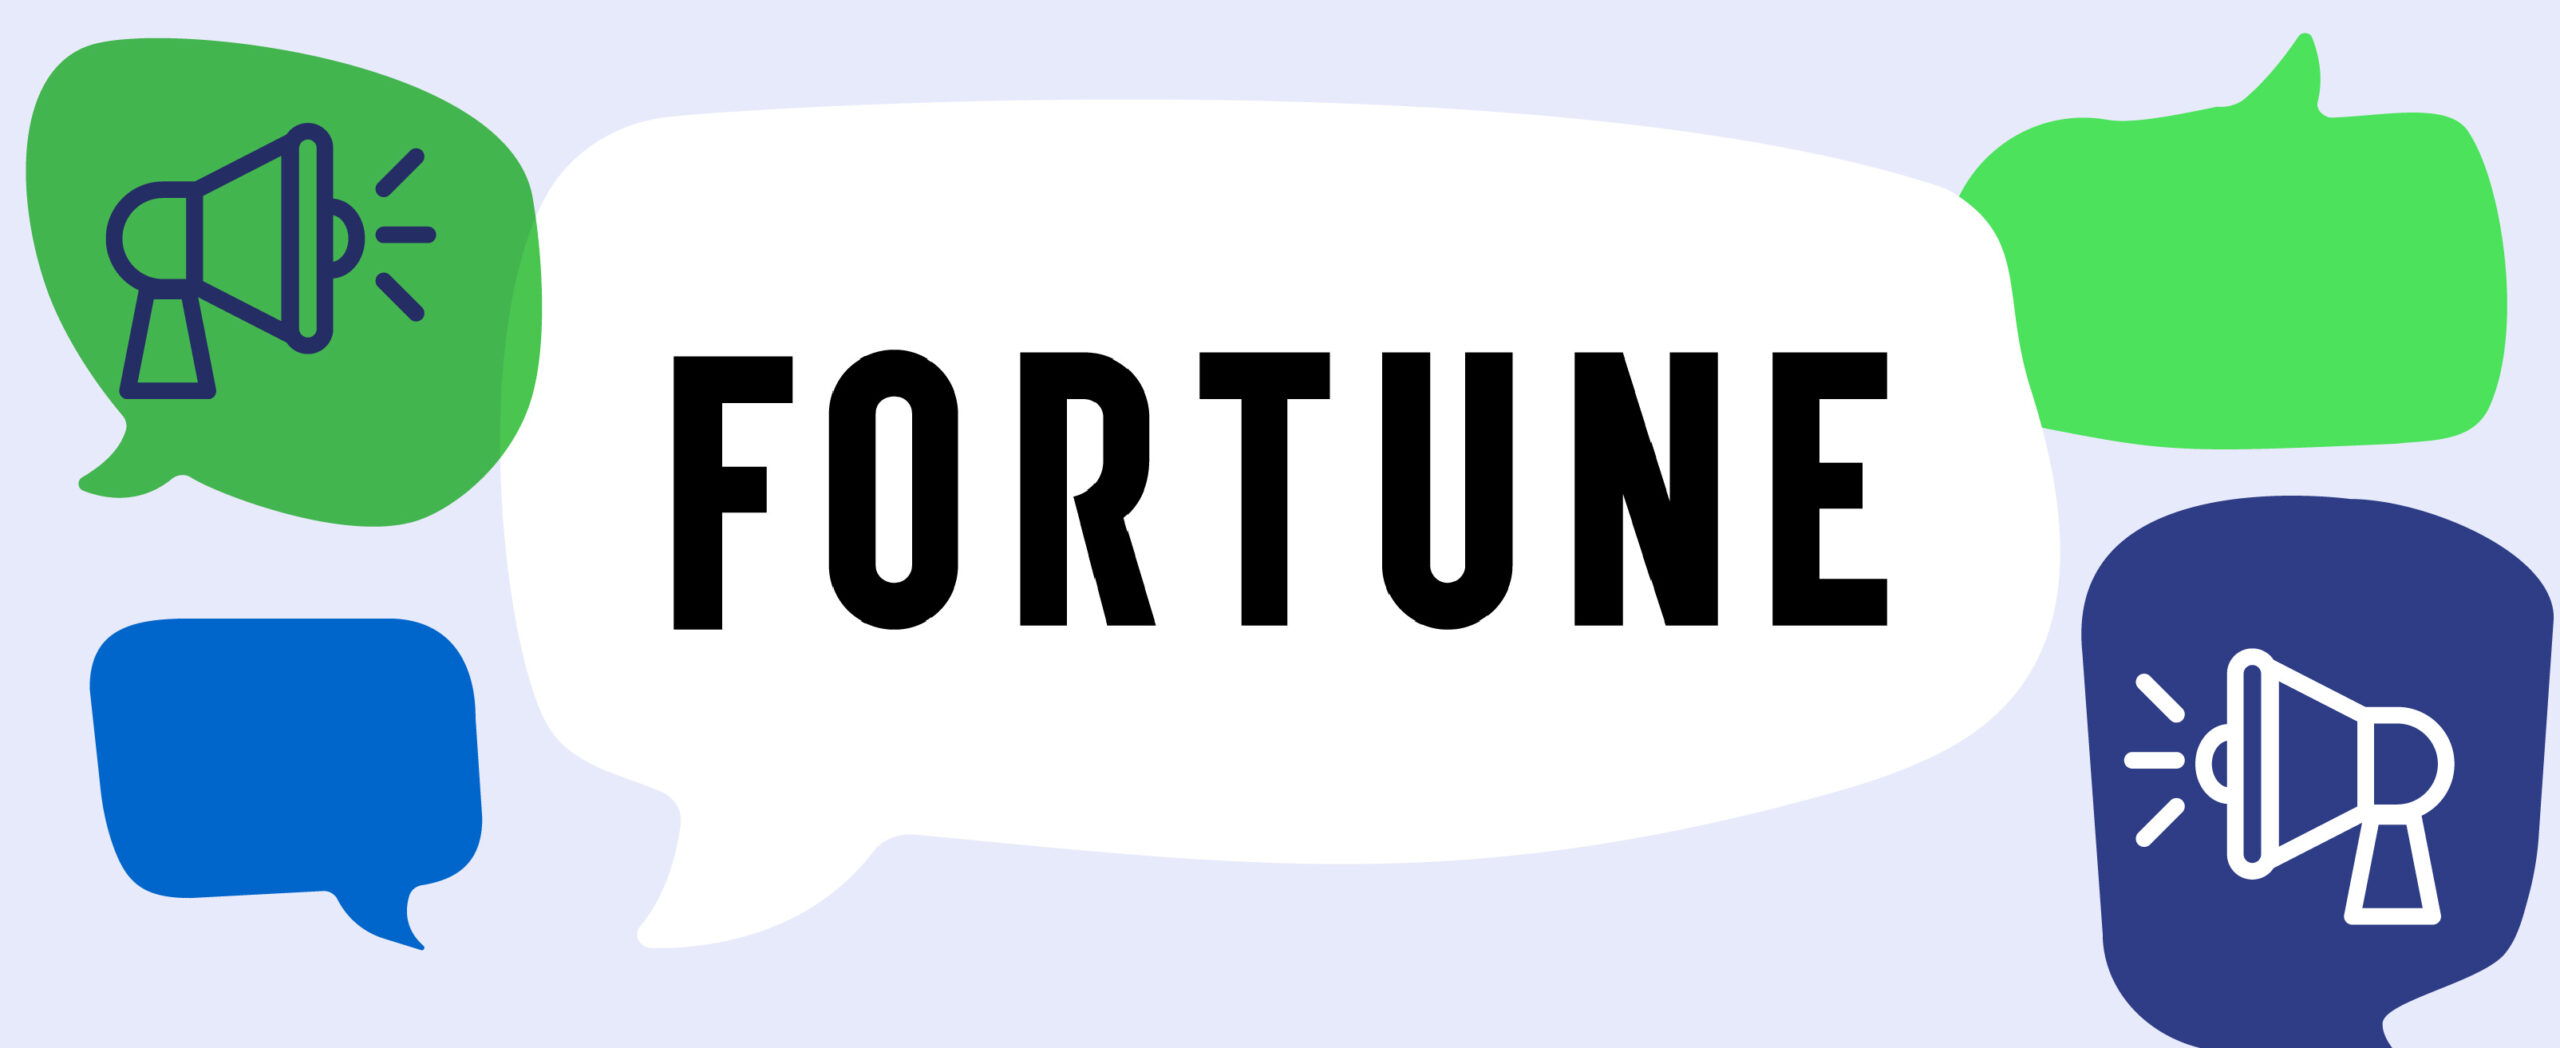 Fortune CHRO Daily: Only 10% of Fortune 500 companies disclose how many people with disabilities work at their organization—but employees expect more transparency